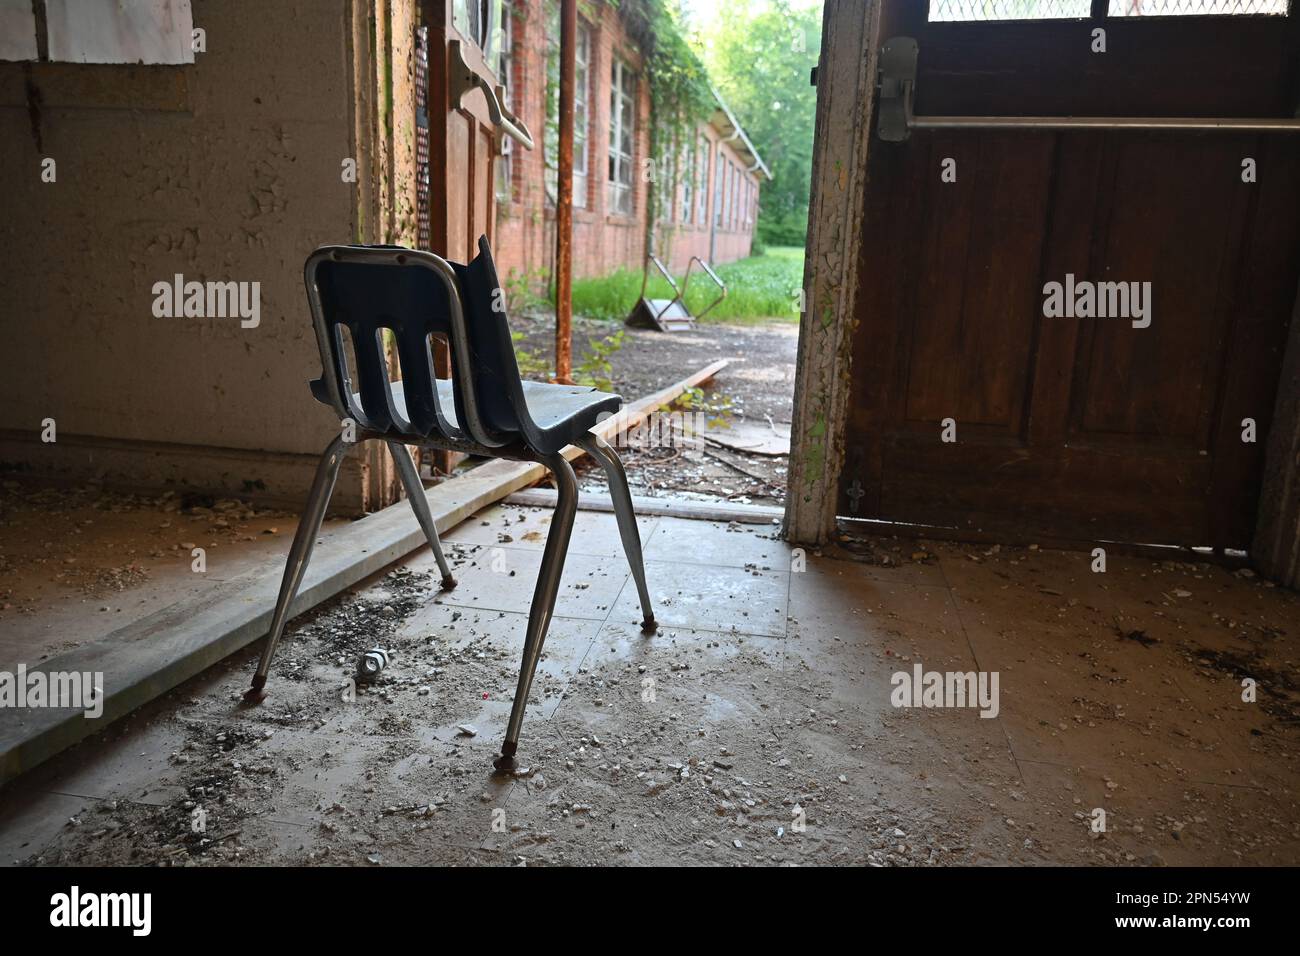 A discarded student desk left in front of an open door at a school abandoned since 2001. Stock Photo